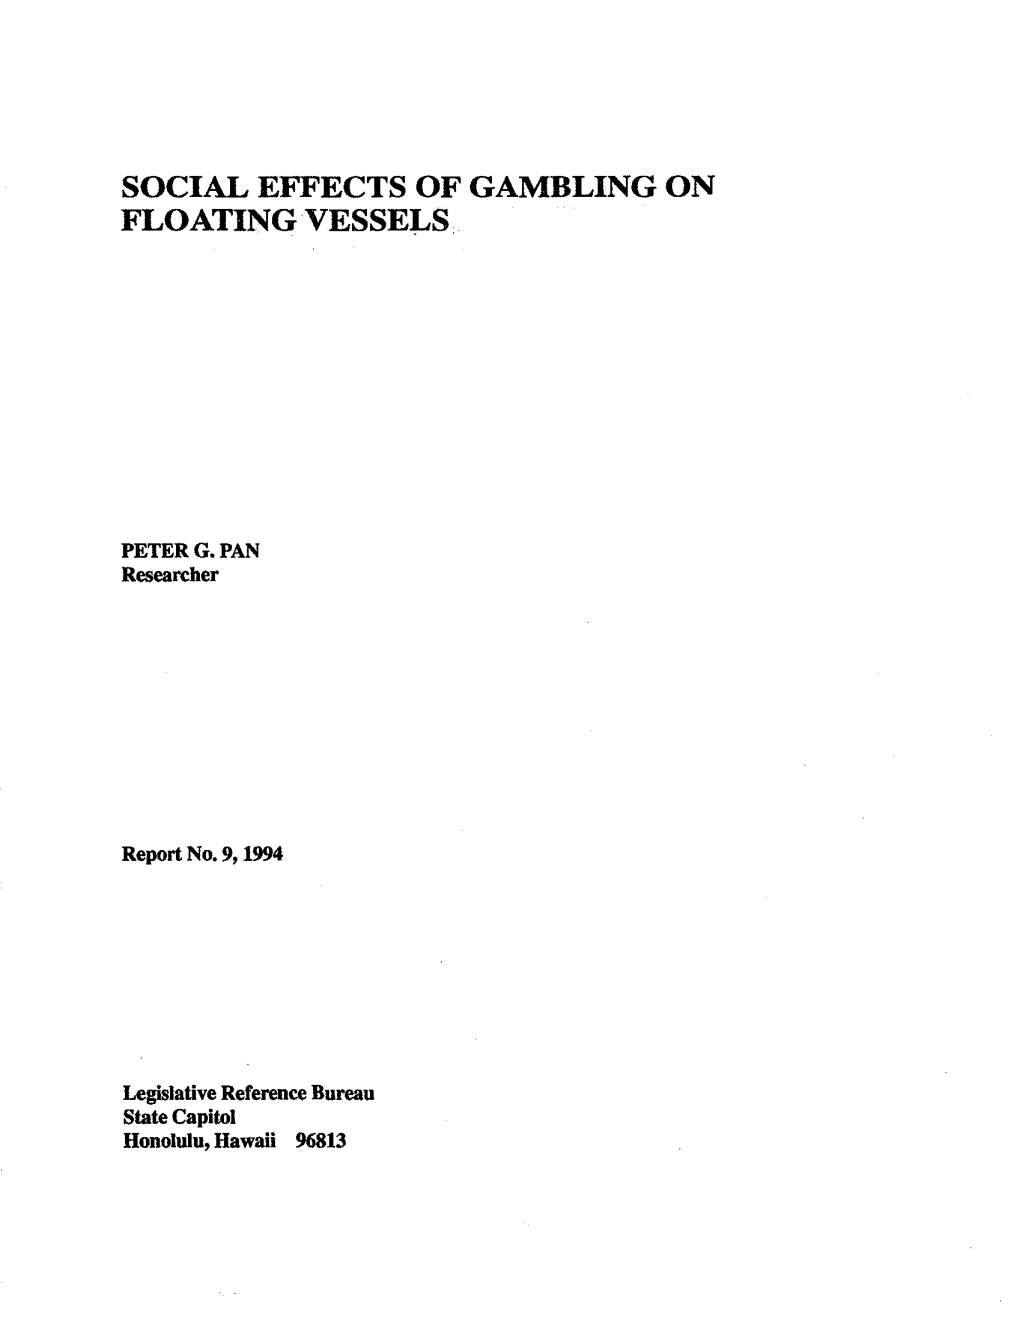 Social Effects of Gambling on Floating Vessels